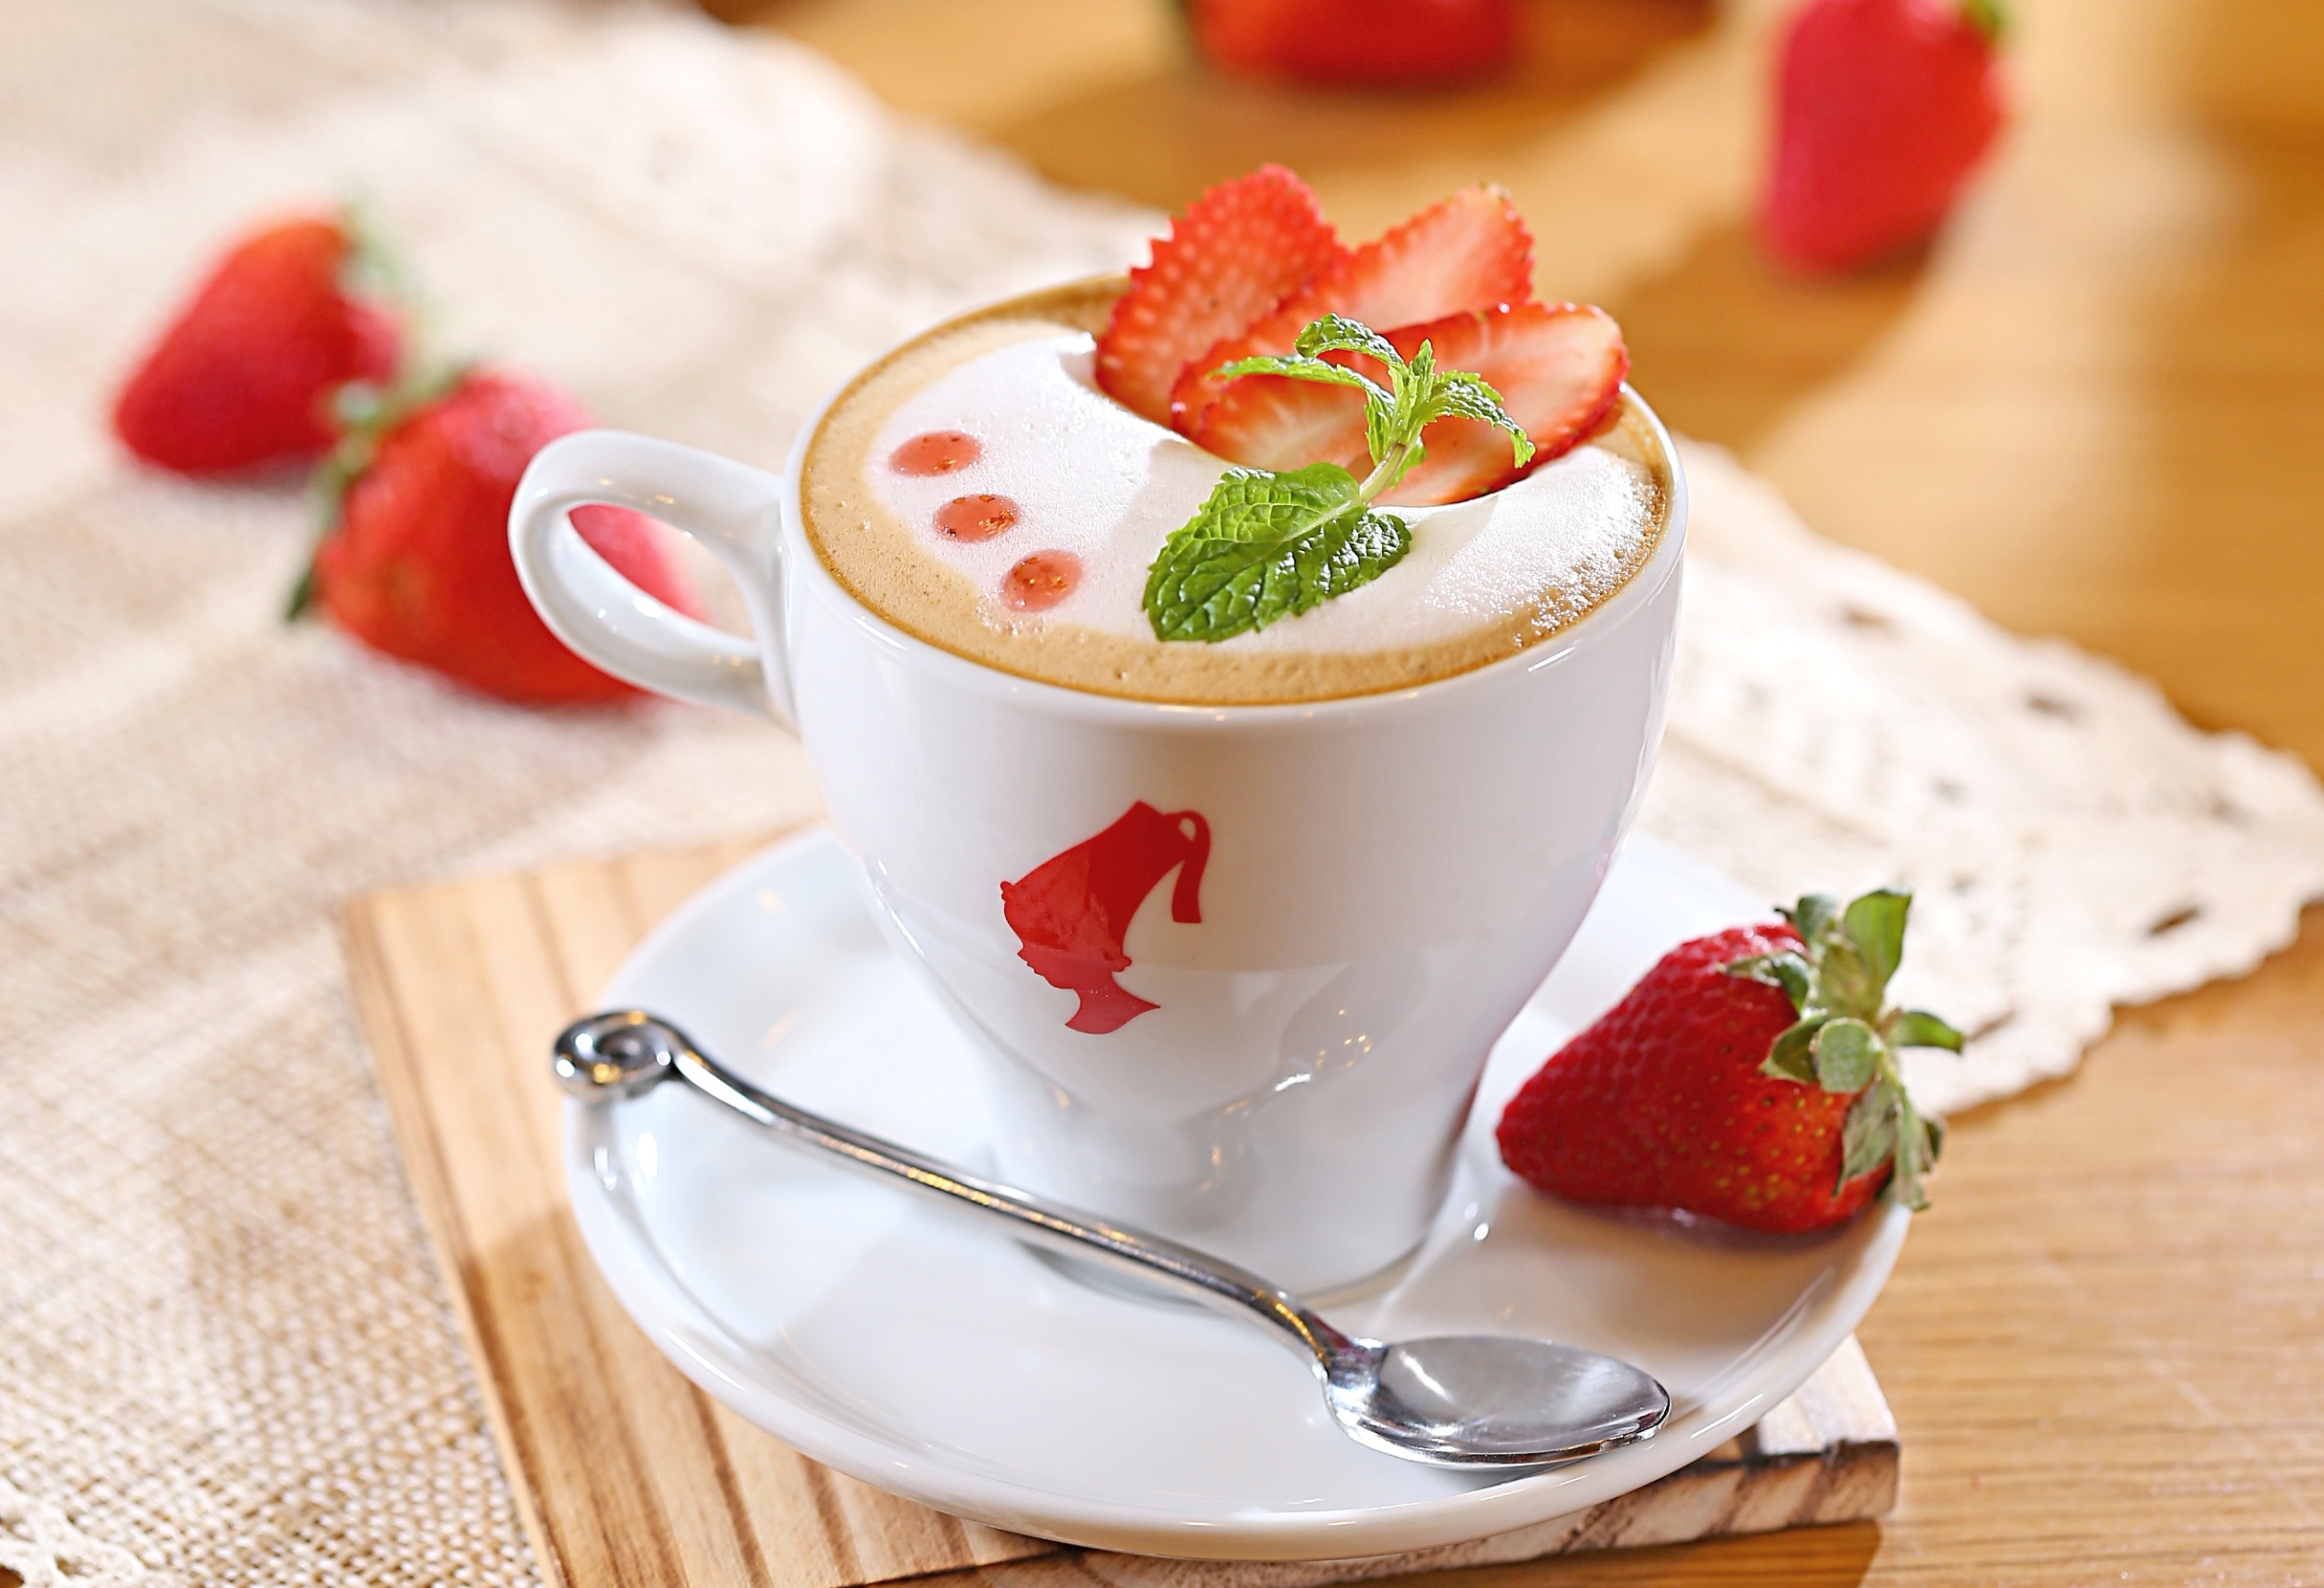 65510 download wallpaper strawberry, food, sweet, foam, cappuccino screensavers and pictures for free